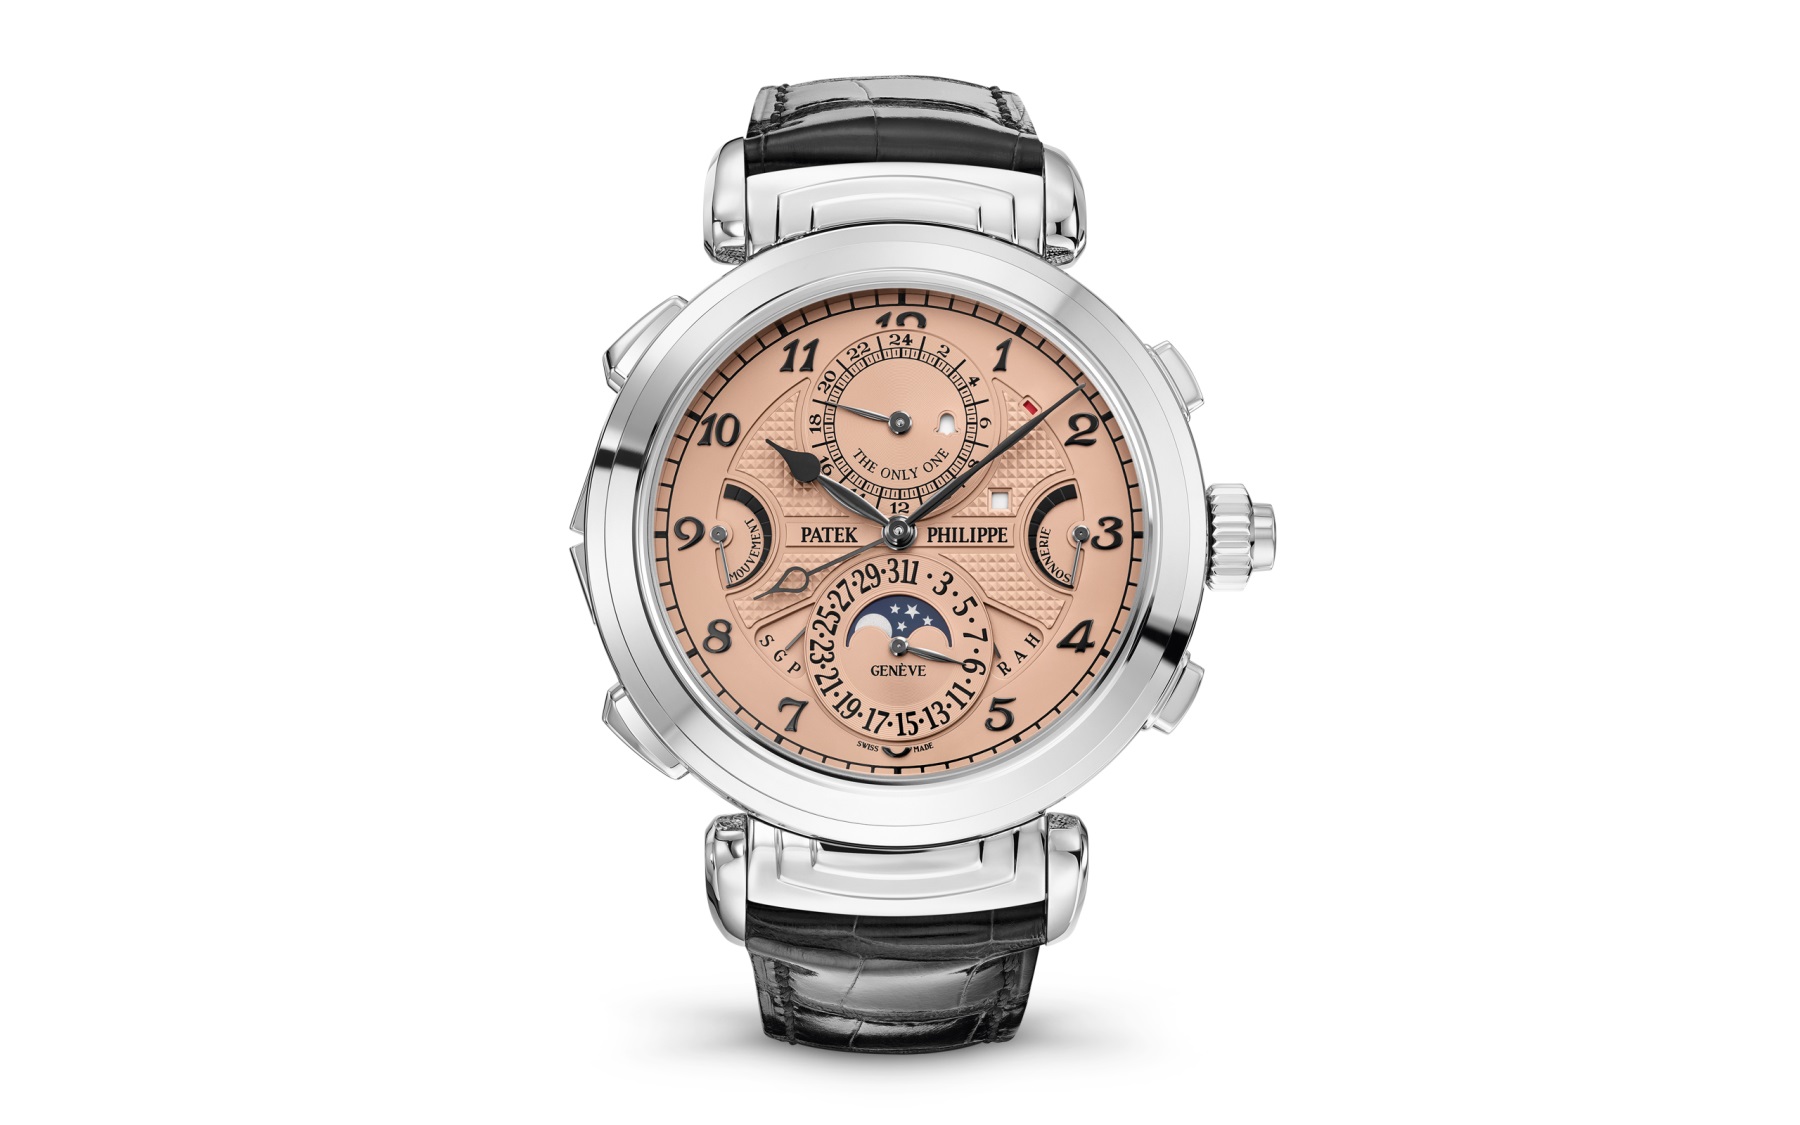 The salmon-colored dial of the Patek Philippe Grandmaster Chime Ref. 6300A-010